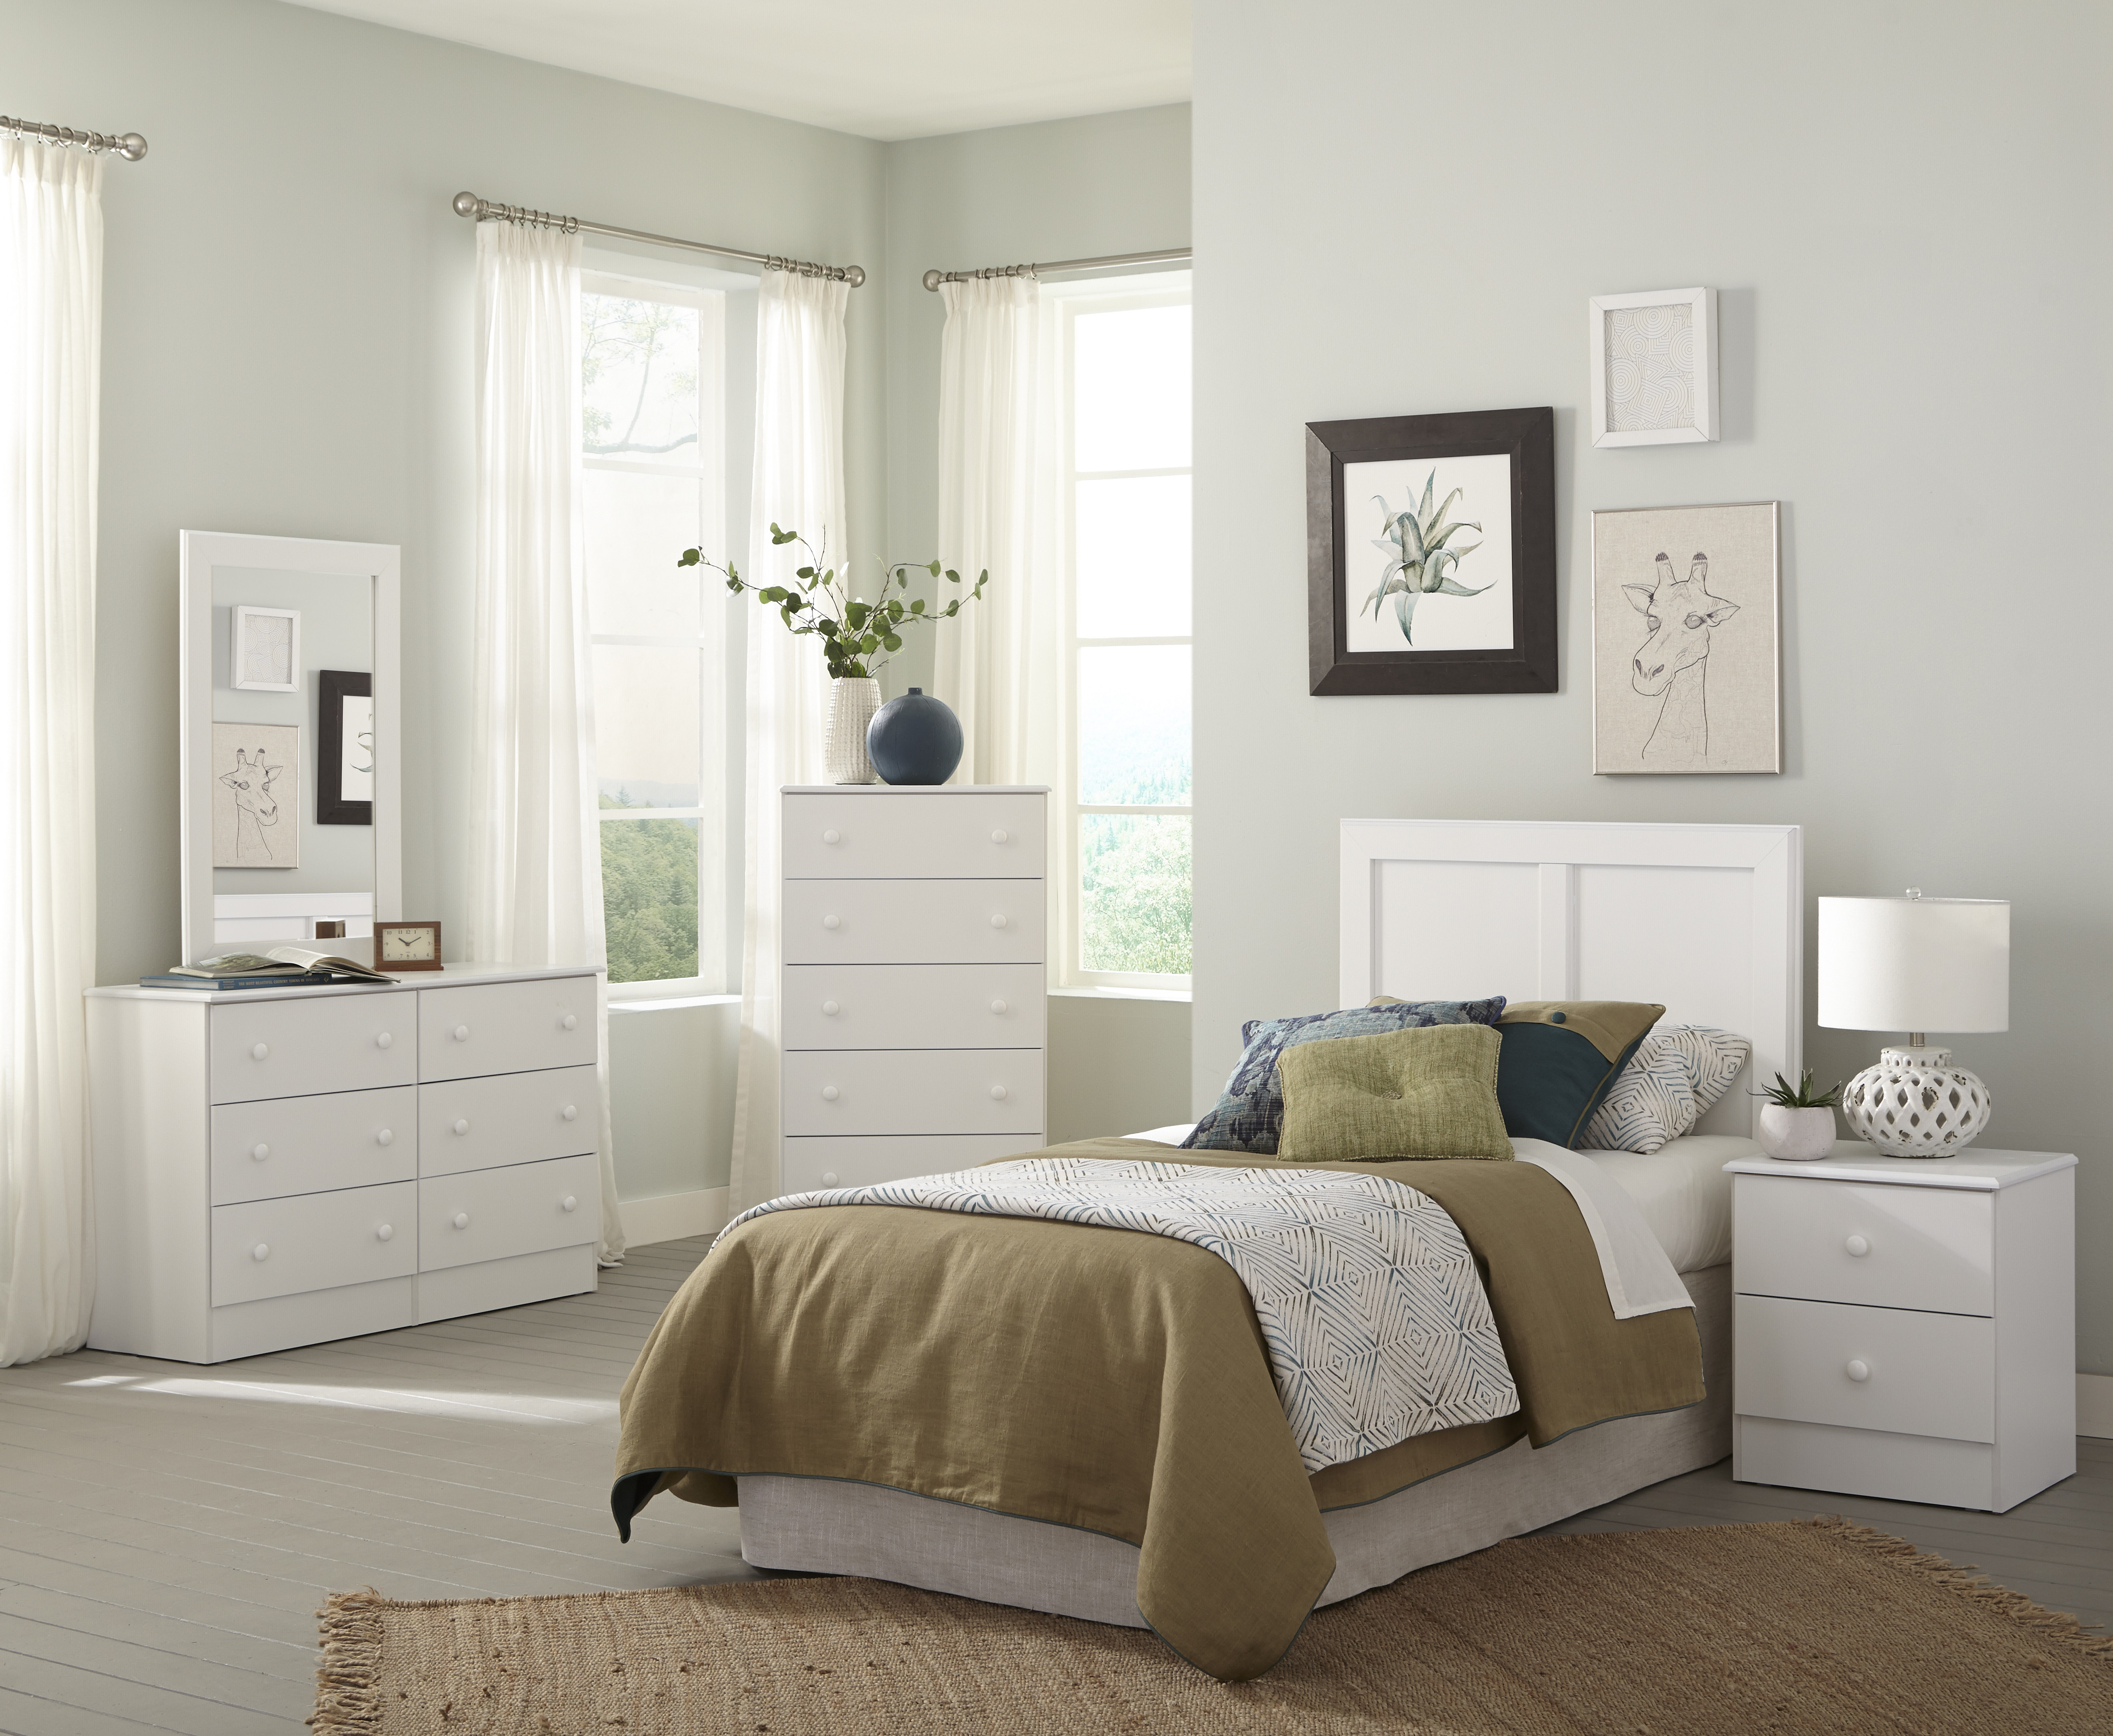 American Furniture Classics Classic White Collection 193K6T Six Piece White Bedroom set including Twin Headboard, Five Drawer Chest, Six Drawer Dresser, Mirror, and two Night Stands. - image 1 of 8